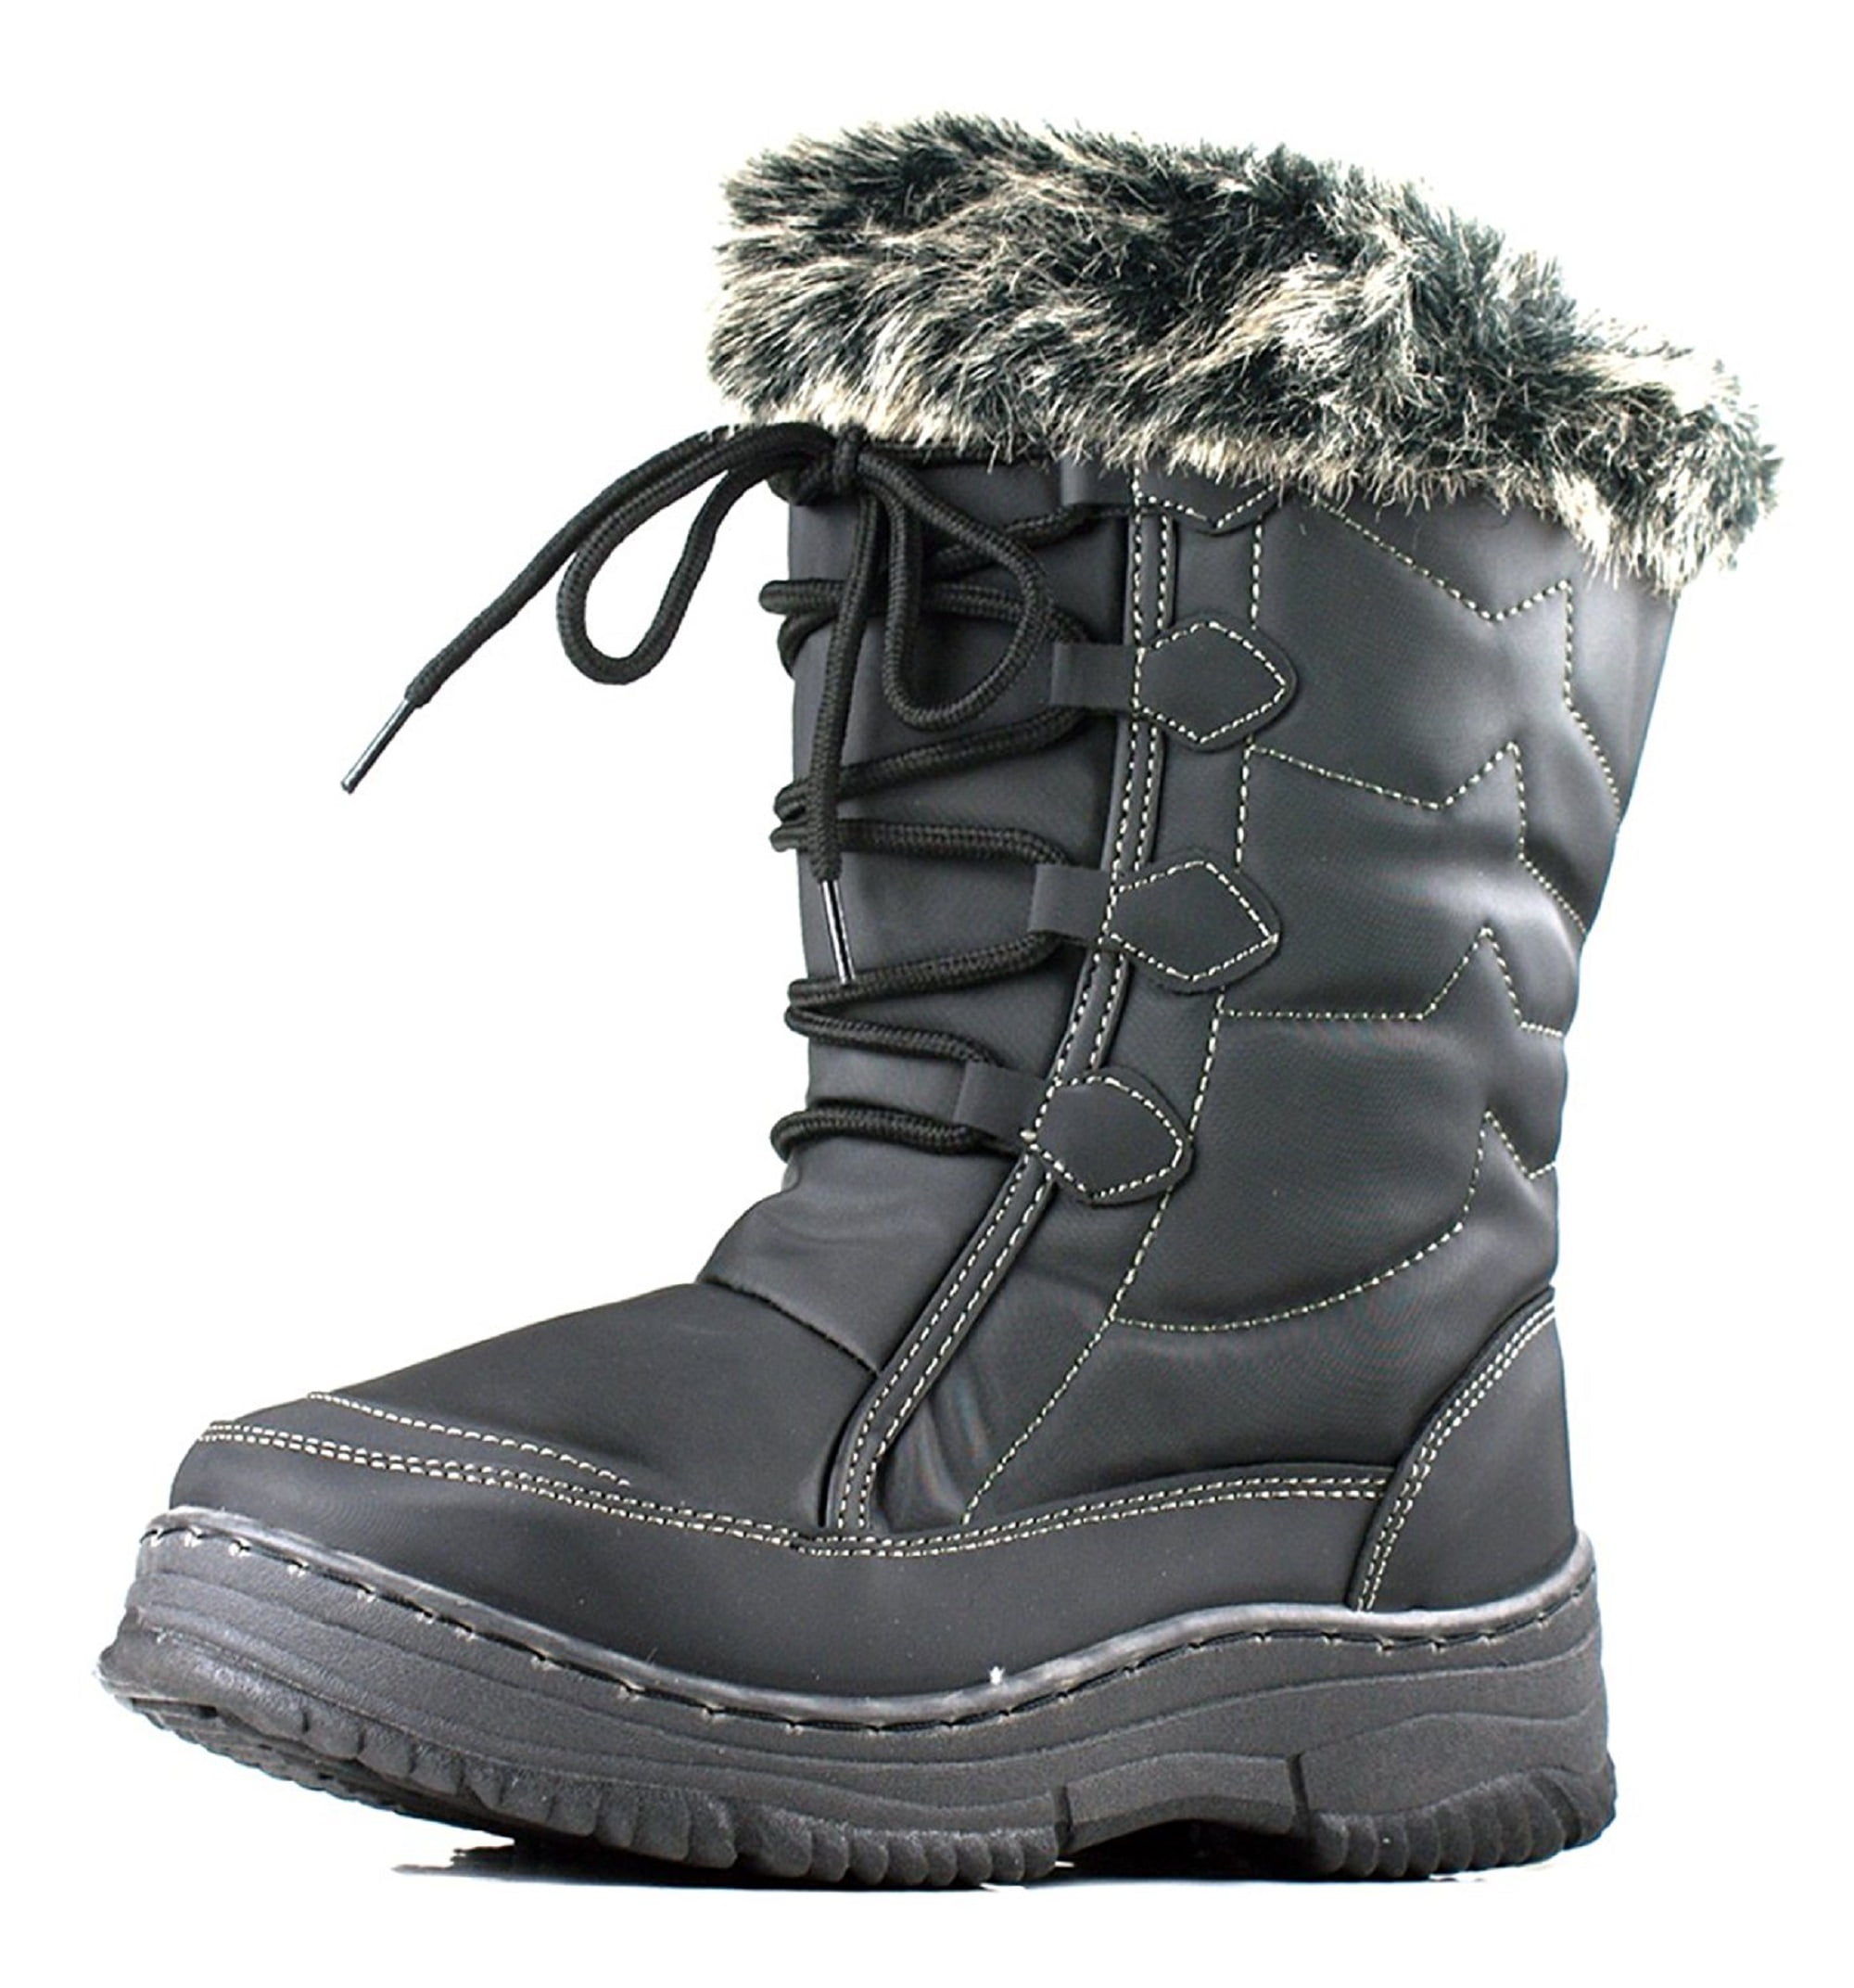 Womens Winter Snow Boots Mid-Calf Water Resistant Outdoor Warm 